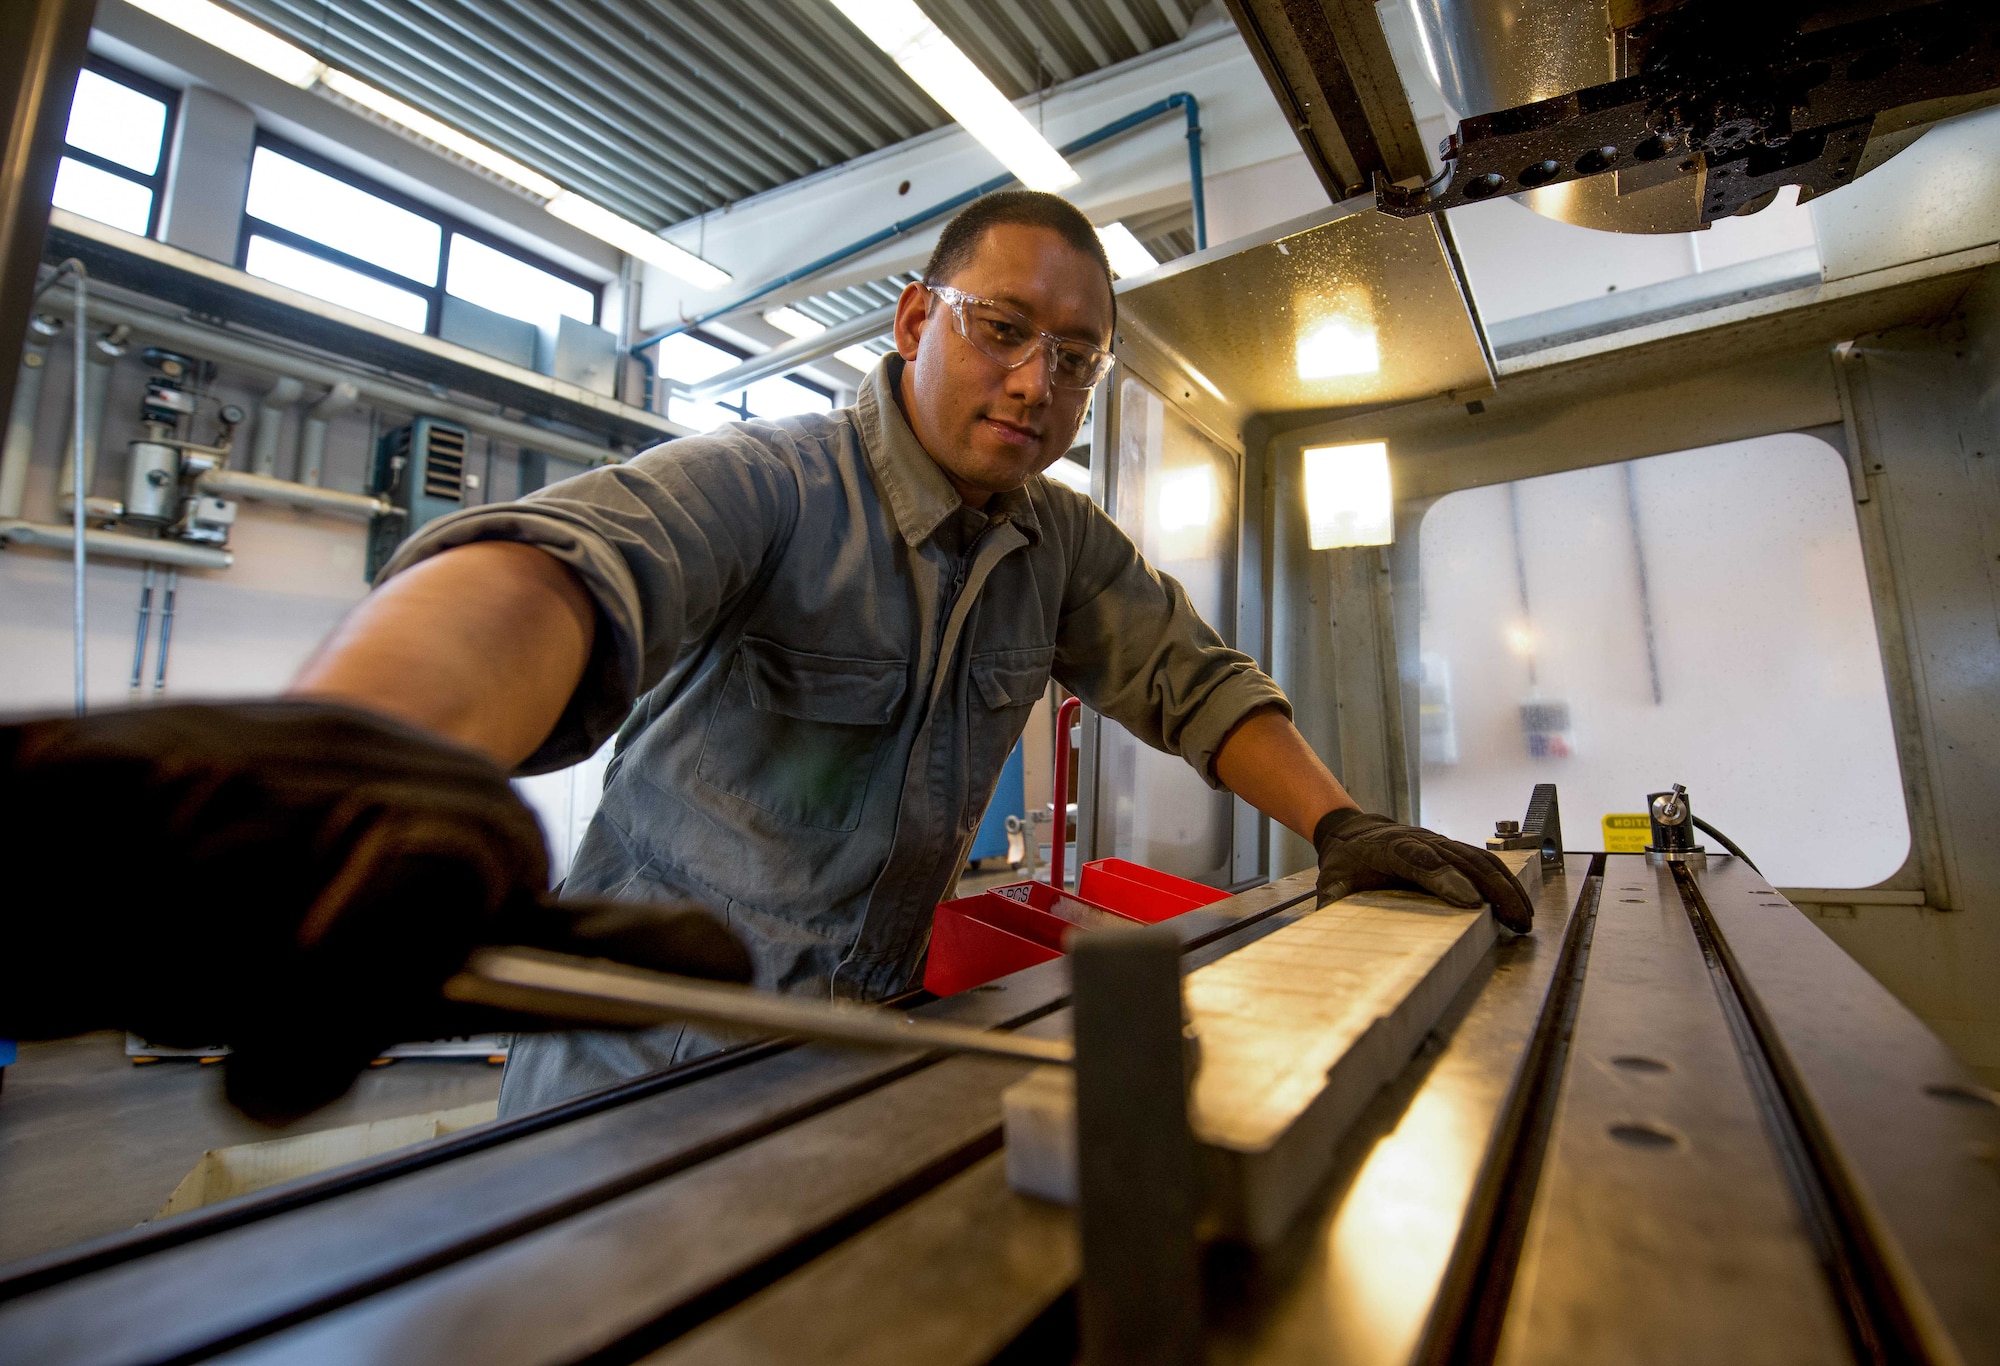 Staff Sgt. Mark Leyva, 86th Maintenance Squadron aircraft metals technology floor supervisor, secures an aluminum deck panel door support inside a computer numerical control milling machine on Ramstein Air Base, Germany, May 3, 2017.   Leyva is skilled in welding and machining parts and tools which other maintenance Airmen use to repair aircraft, enabling Ramstein to continue delivering airlift around the world in a timely manner. (U.S. Air Force photo by Senior Airman Elizabeth Baker/Released)